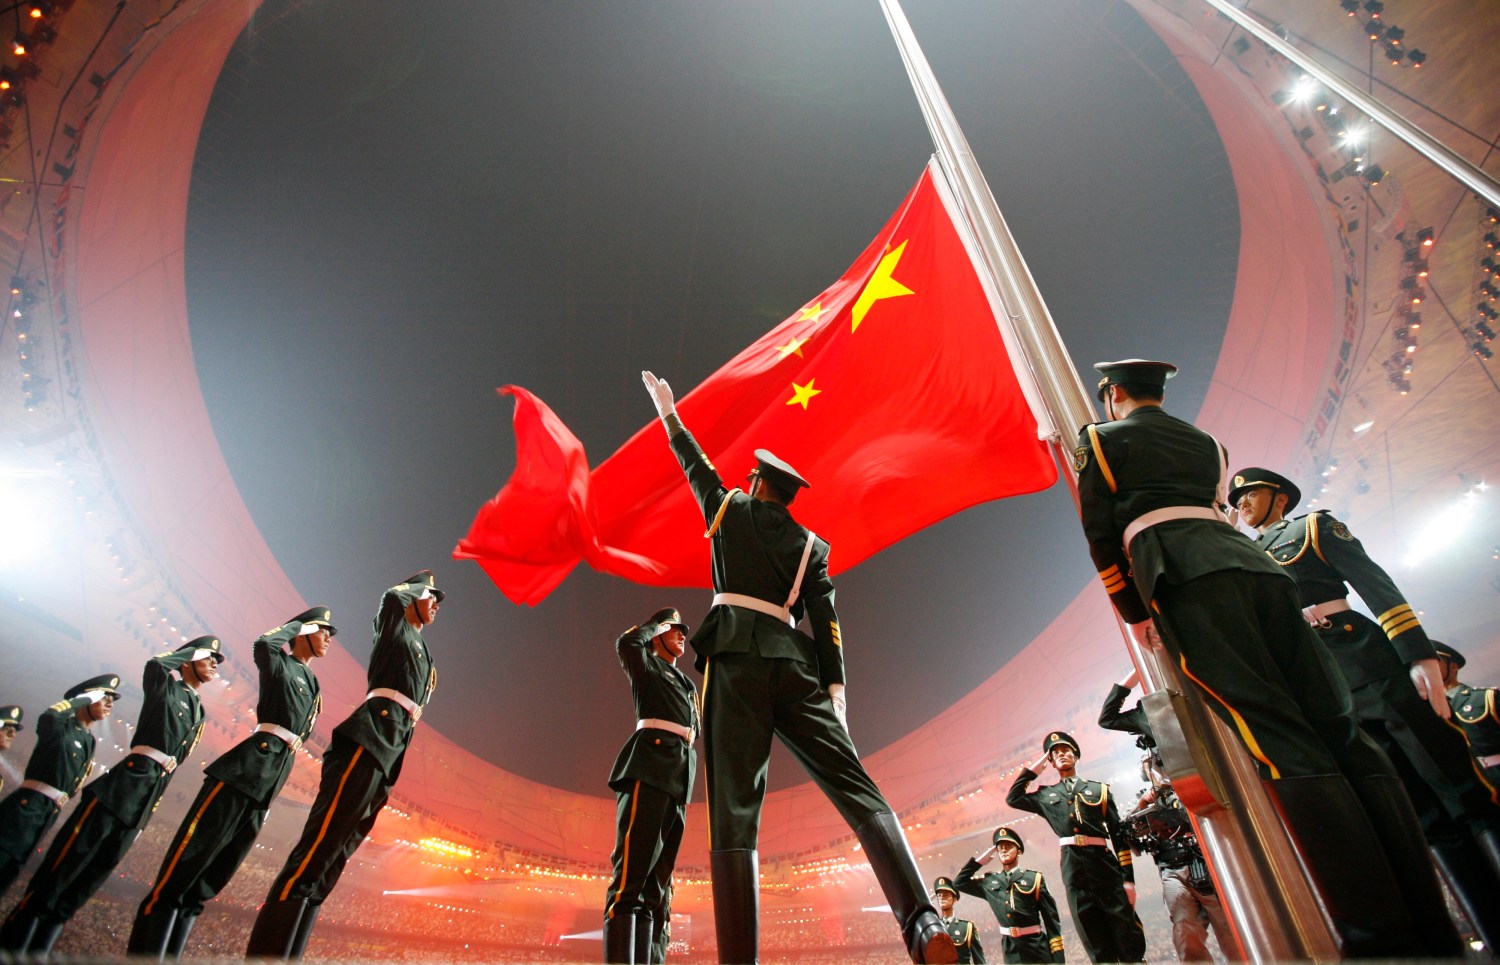 China's national flag is raised during the opening ceremony of the Beijing 2008 Olympic Games at the National Stadium in this August 8, 2008 file photo. REUTERS/Jerry Lampen/Files (CHINA - Tags: SPORT TPX IMAGES OF THE DAY)ATTENTION EDITORS - THIS PICTURE IS PART OF PACKAGE '30 YEARS OF REUTERS PICTURES'TO FIND ALL 56 IMAGES SEARCH '30 YEARS' - LM2EB2A0WH901